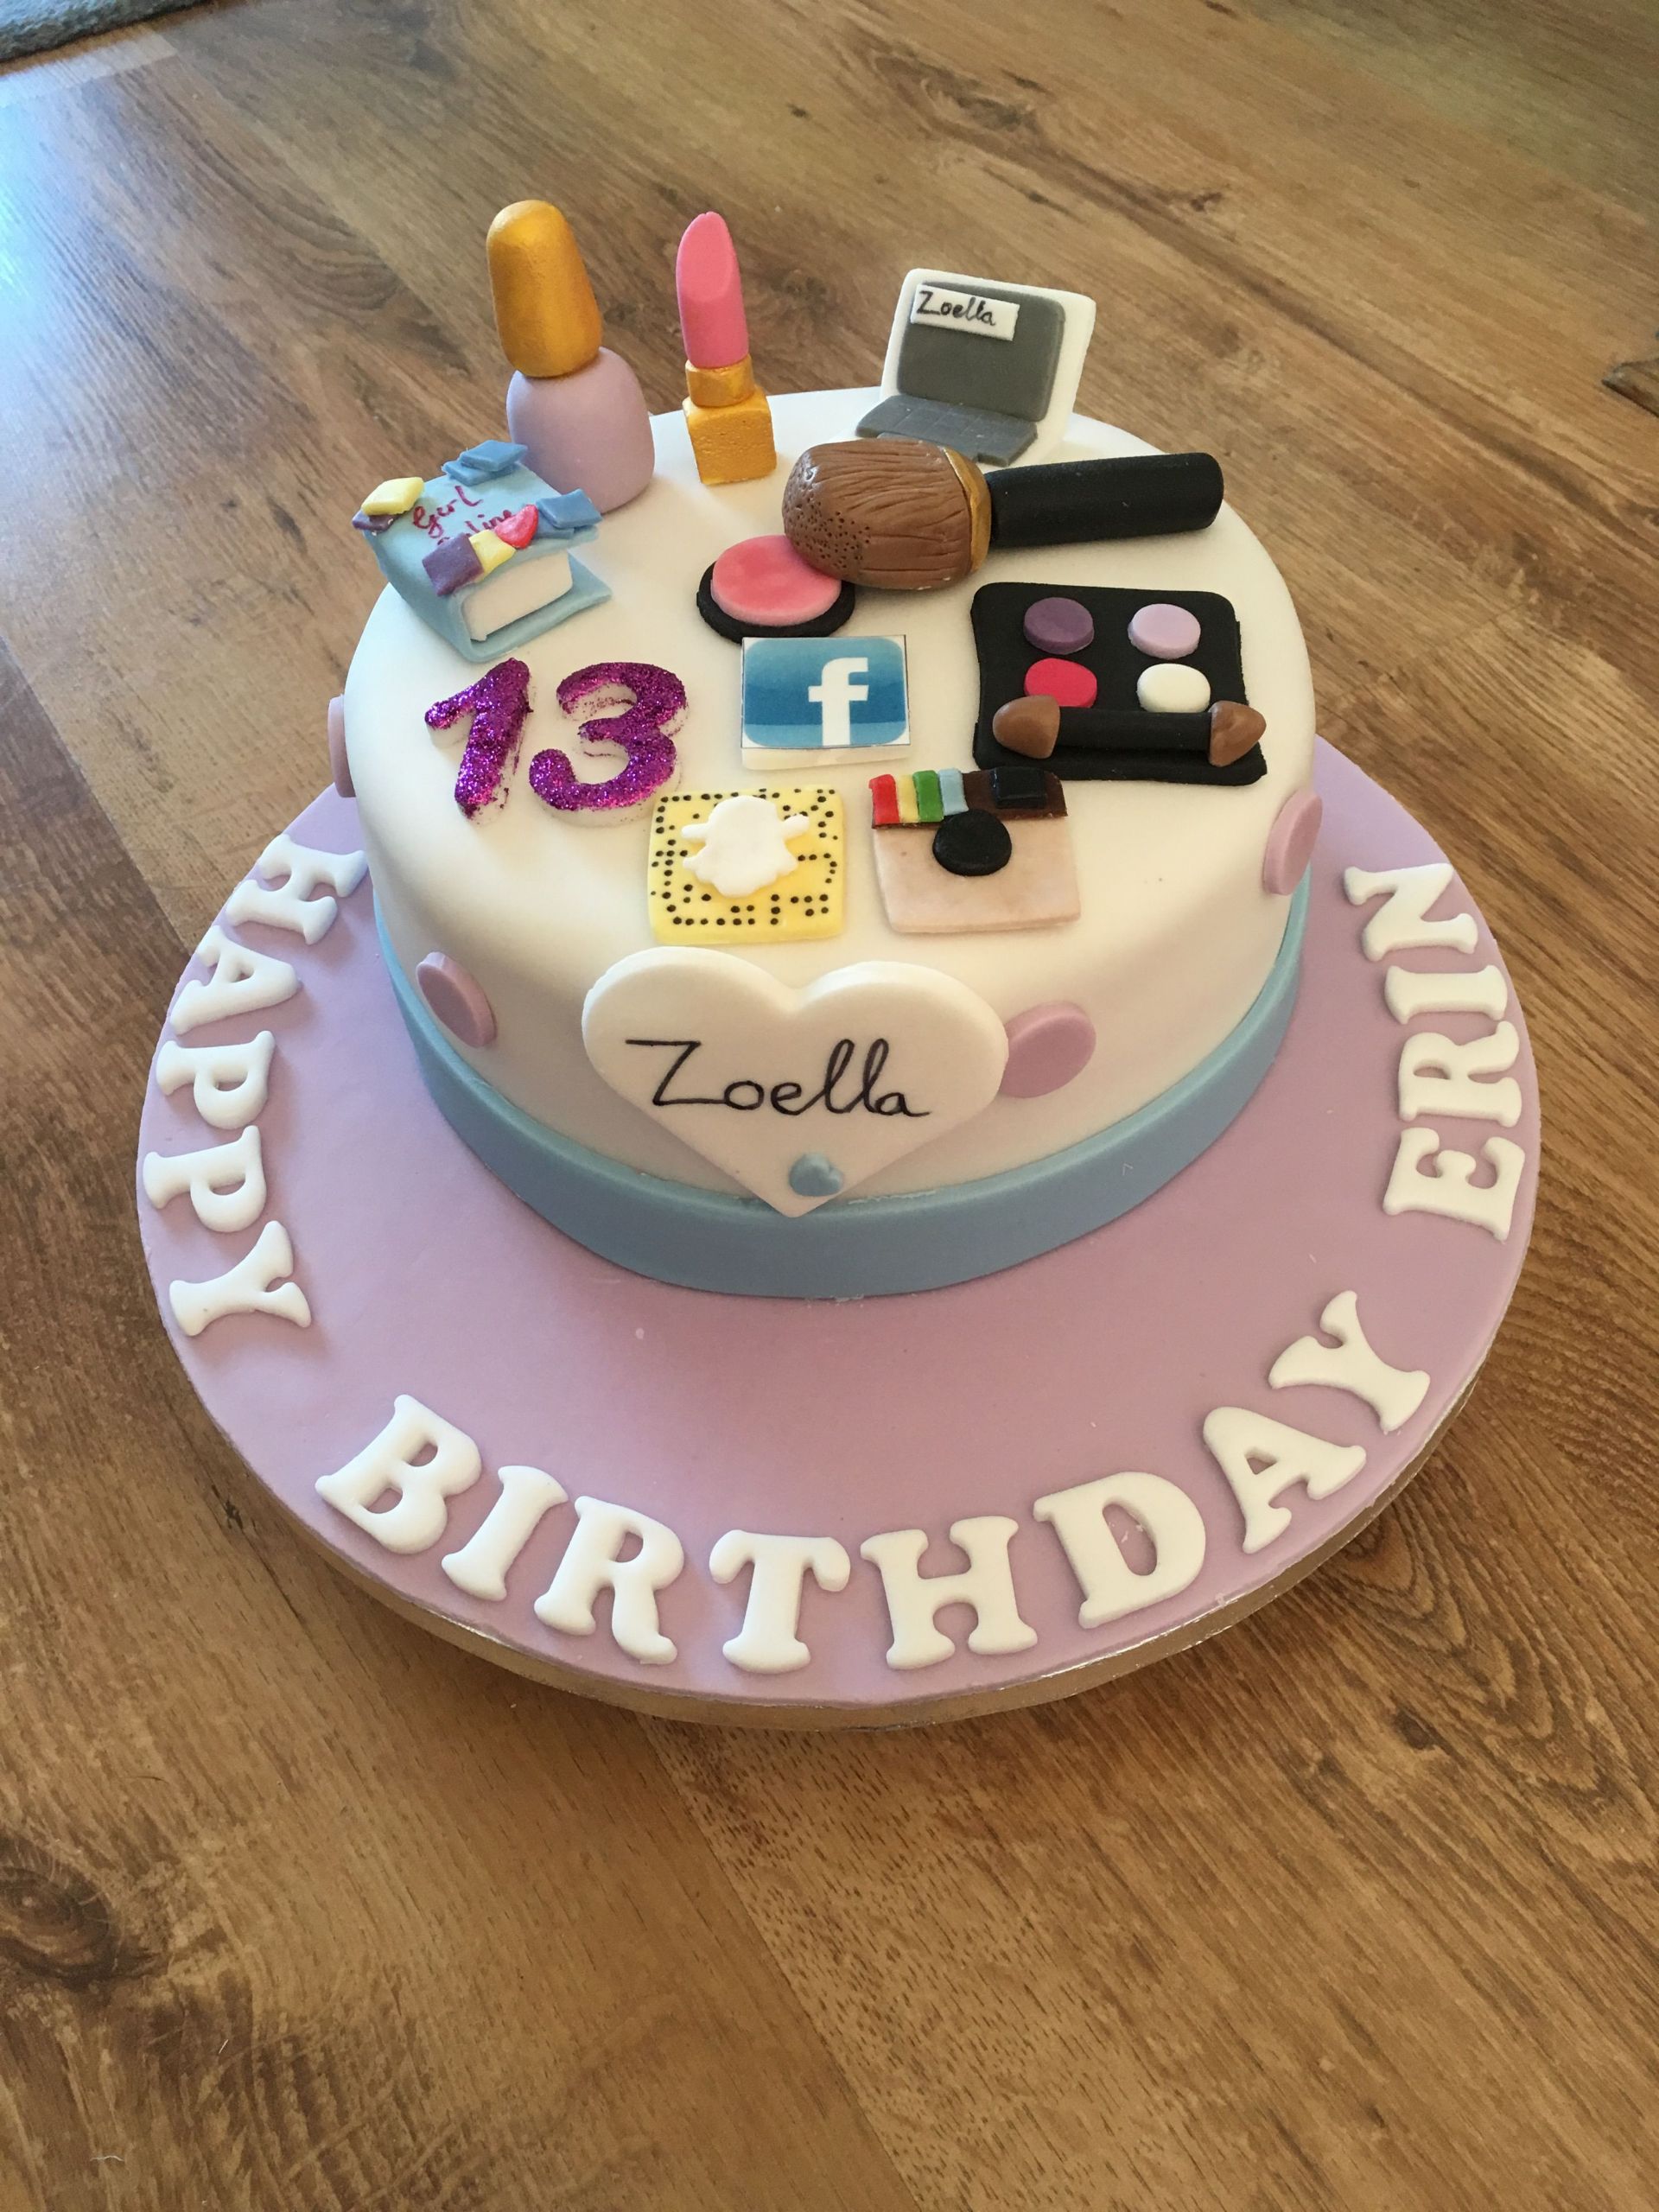 Birthday Party Ideas For A 13 Year Old Girl
 Zoella theme birthday cake for 13 year old